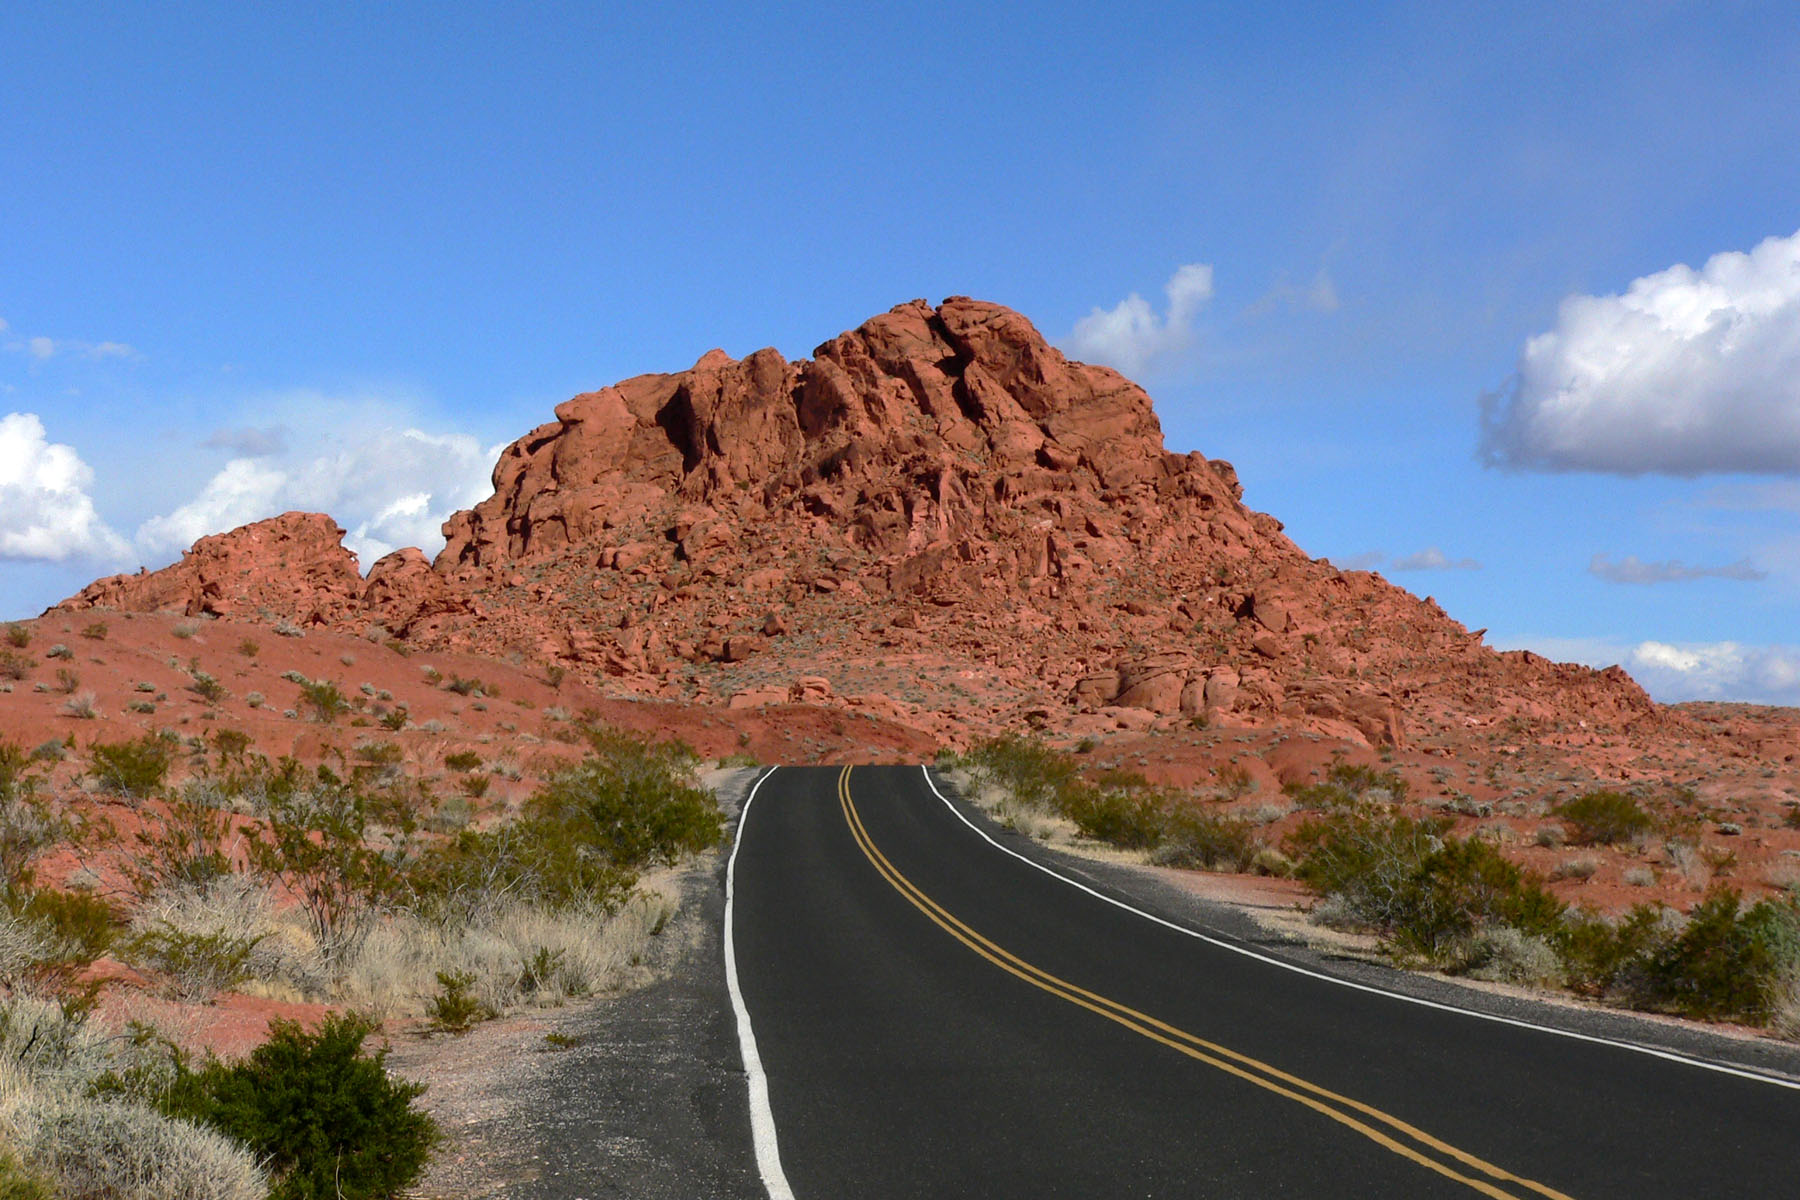 File:Valley of Fire road at Fire Canyon Wash.jpg - Wikimedia Commons